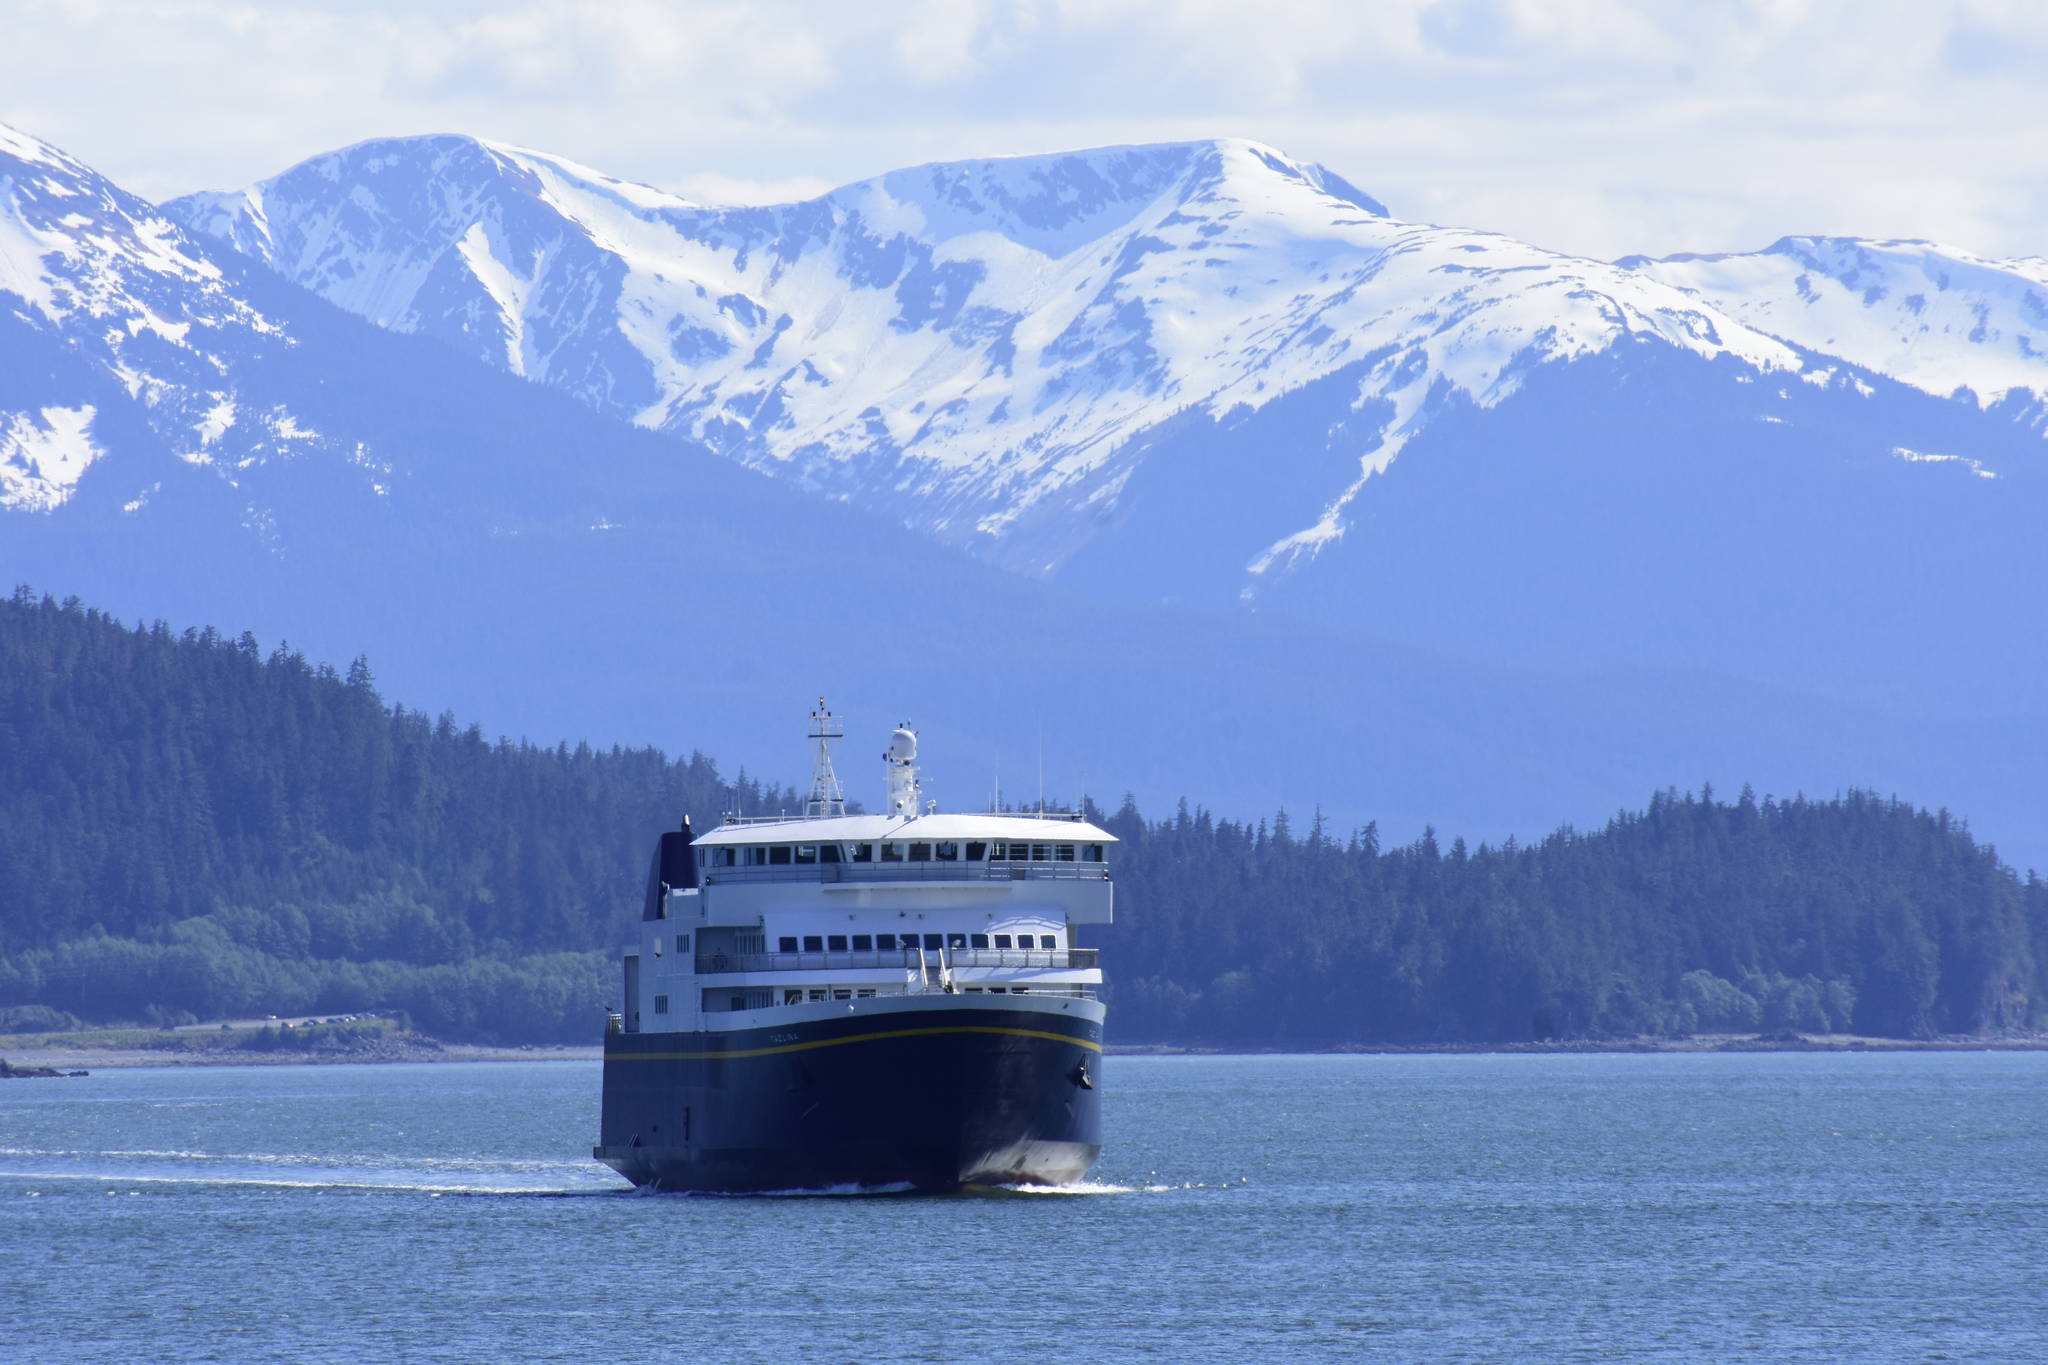 Service from ferries like the MV Tazlina, seen here coming into dock at Juneau on May 16, 2020, have become unreliable for coastal communities as year-to-year planning leads to high levels of uncertainty, according to coastal lawmakers. (Peter Segall / Juneau Empire File)